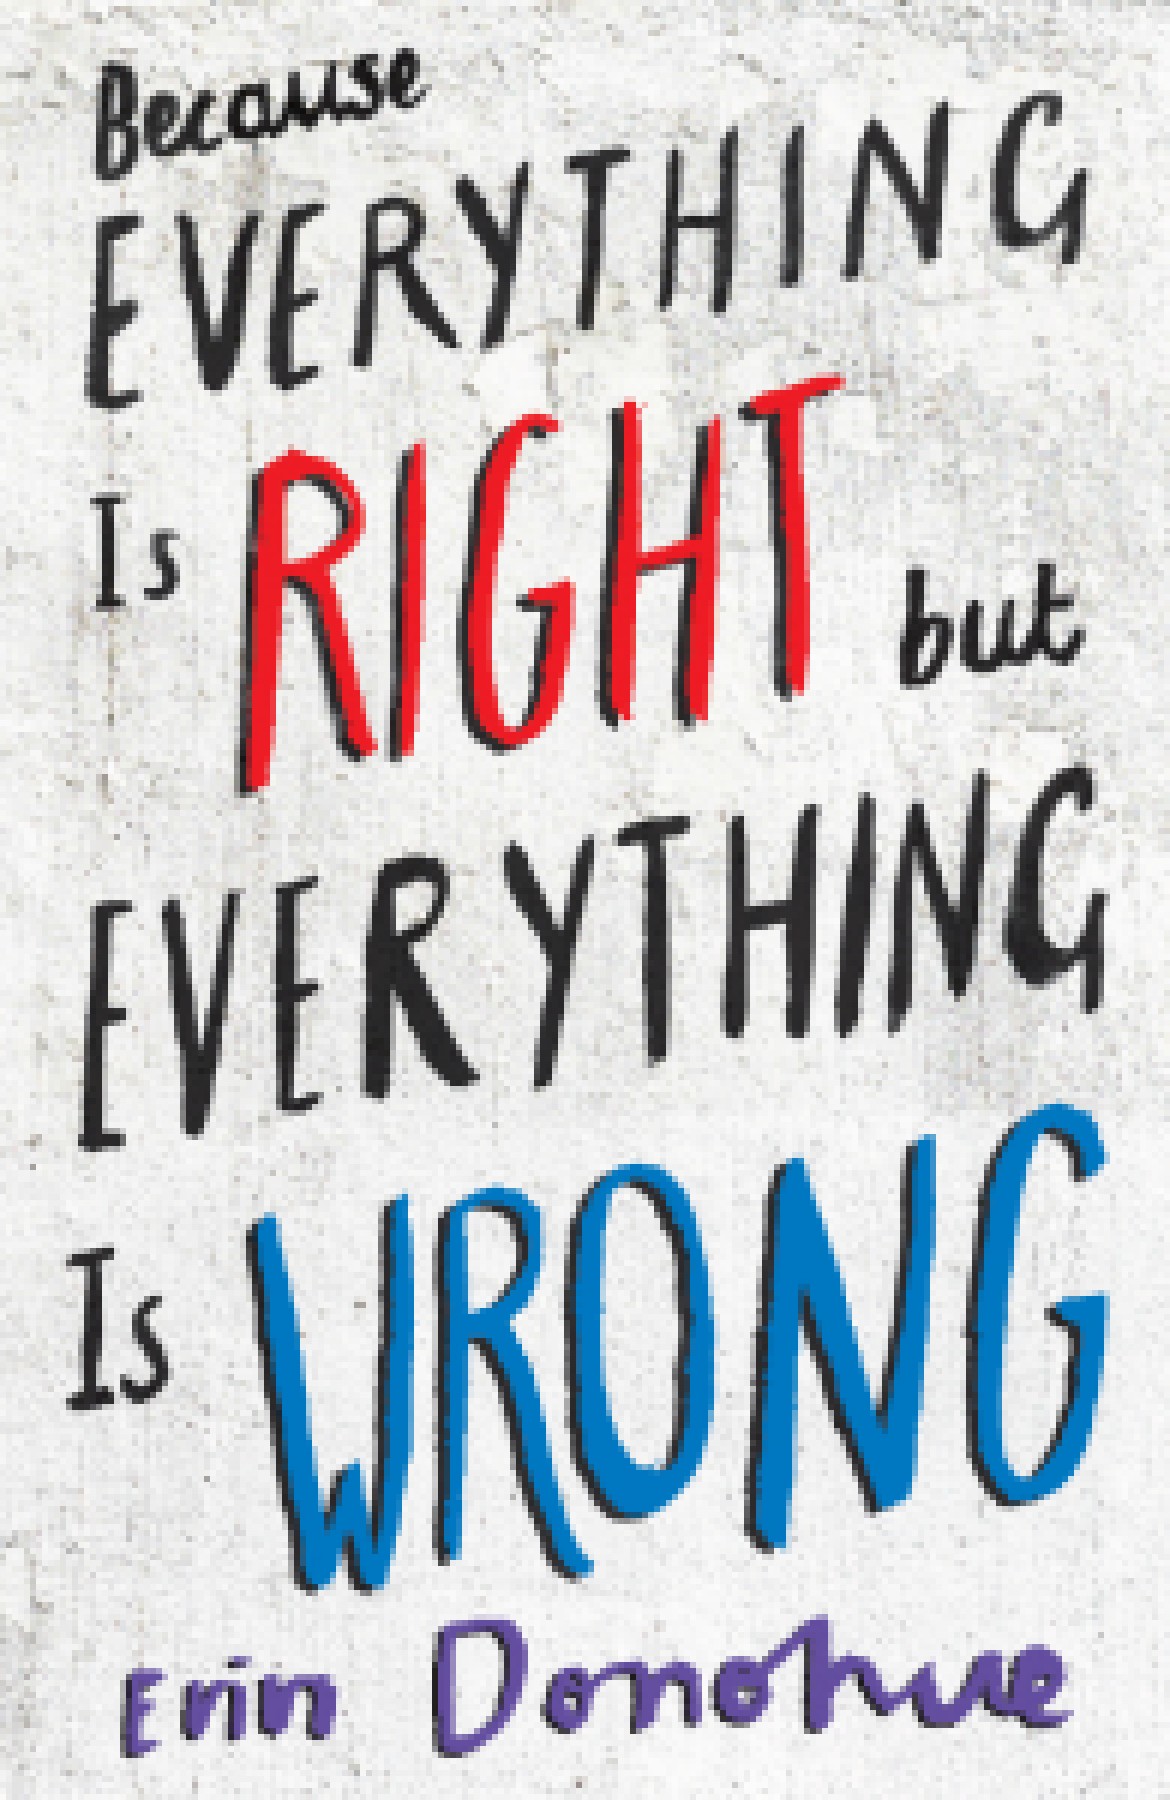 Because everything is right but everything is wrong